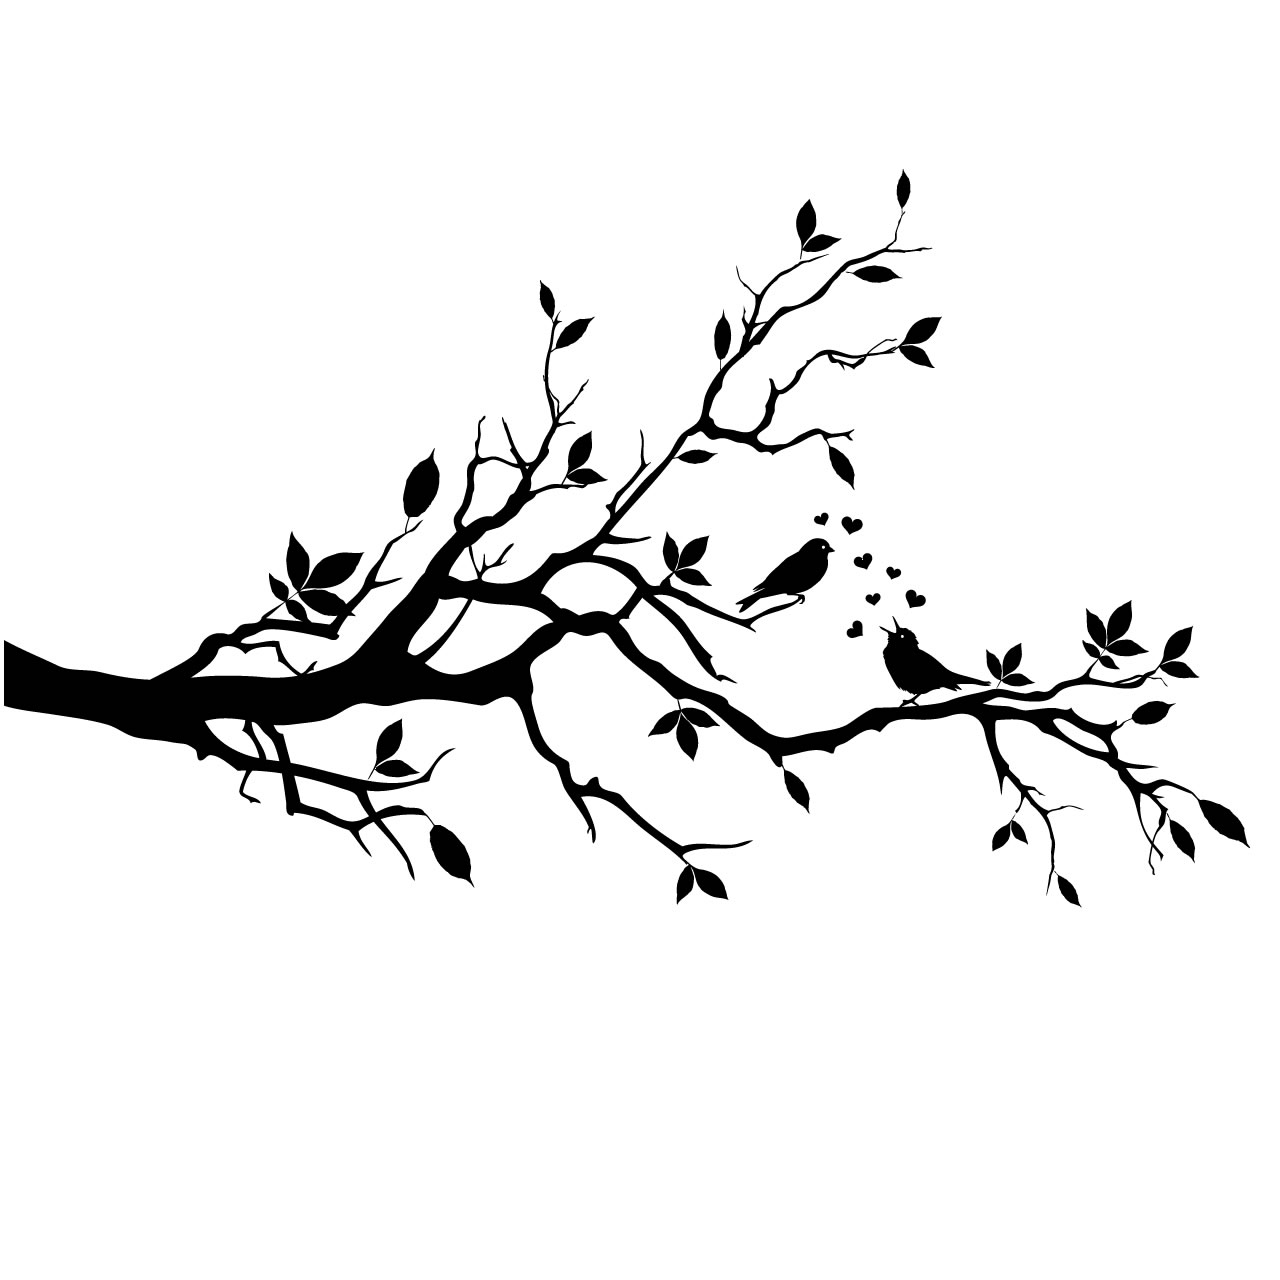 Bird in tree black and white clipart 